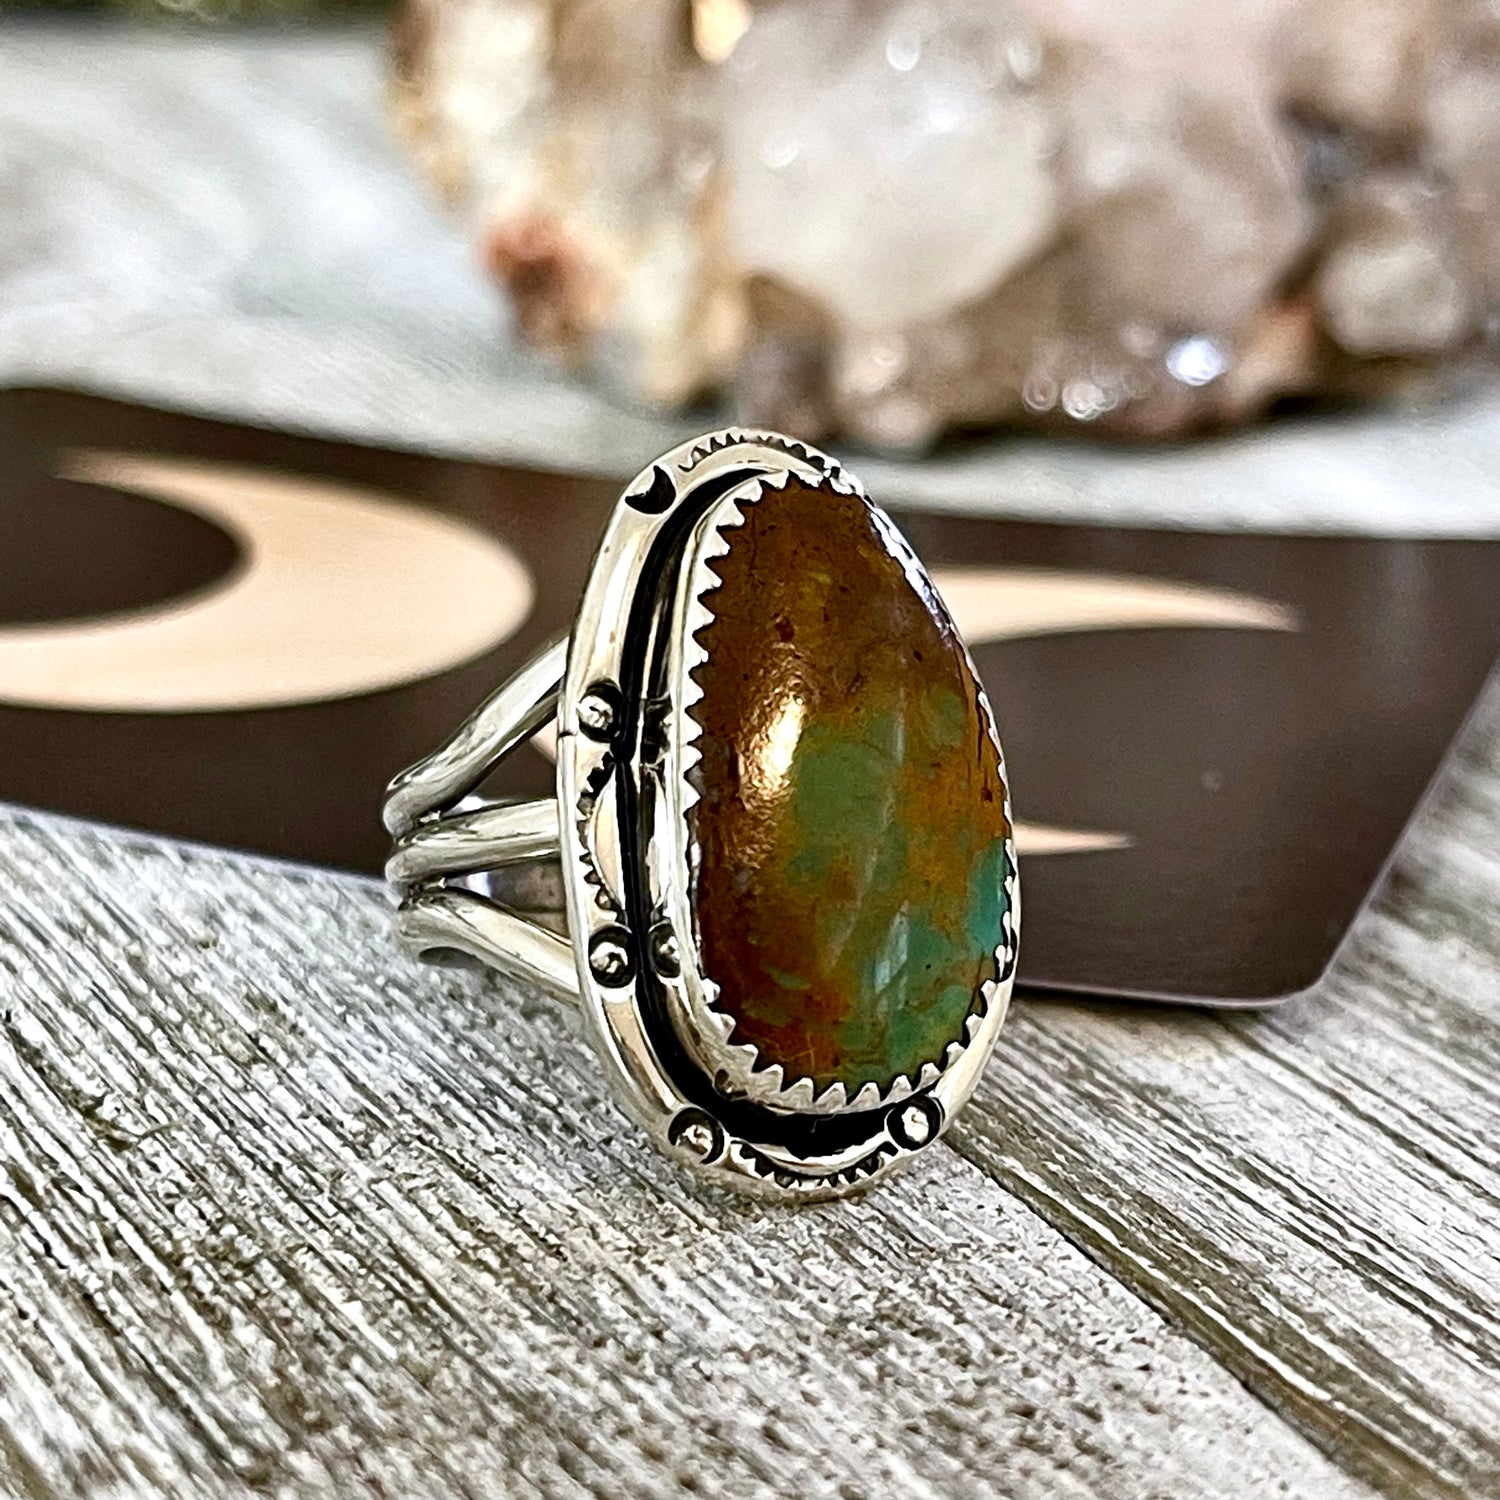 Size 7.5 Kingman Turquoise Statement Ring Set in Thick Sterling Silver / Curated by FOXLARK Collection